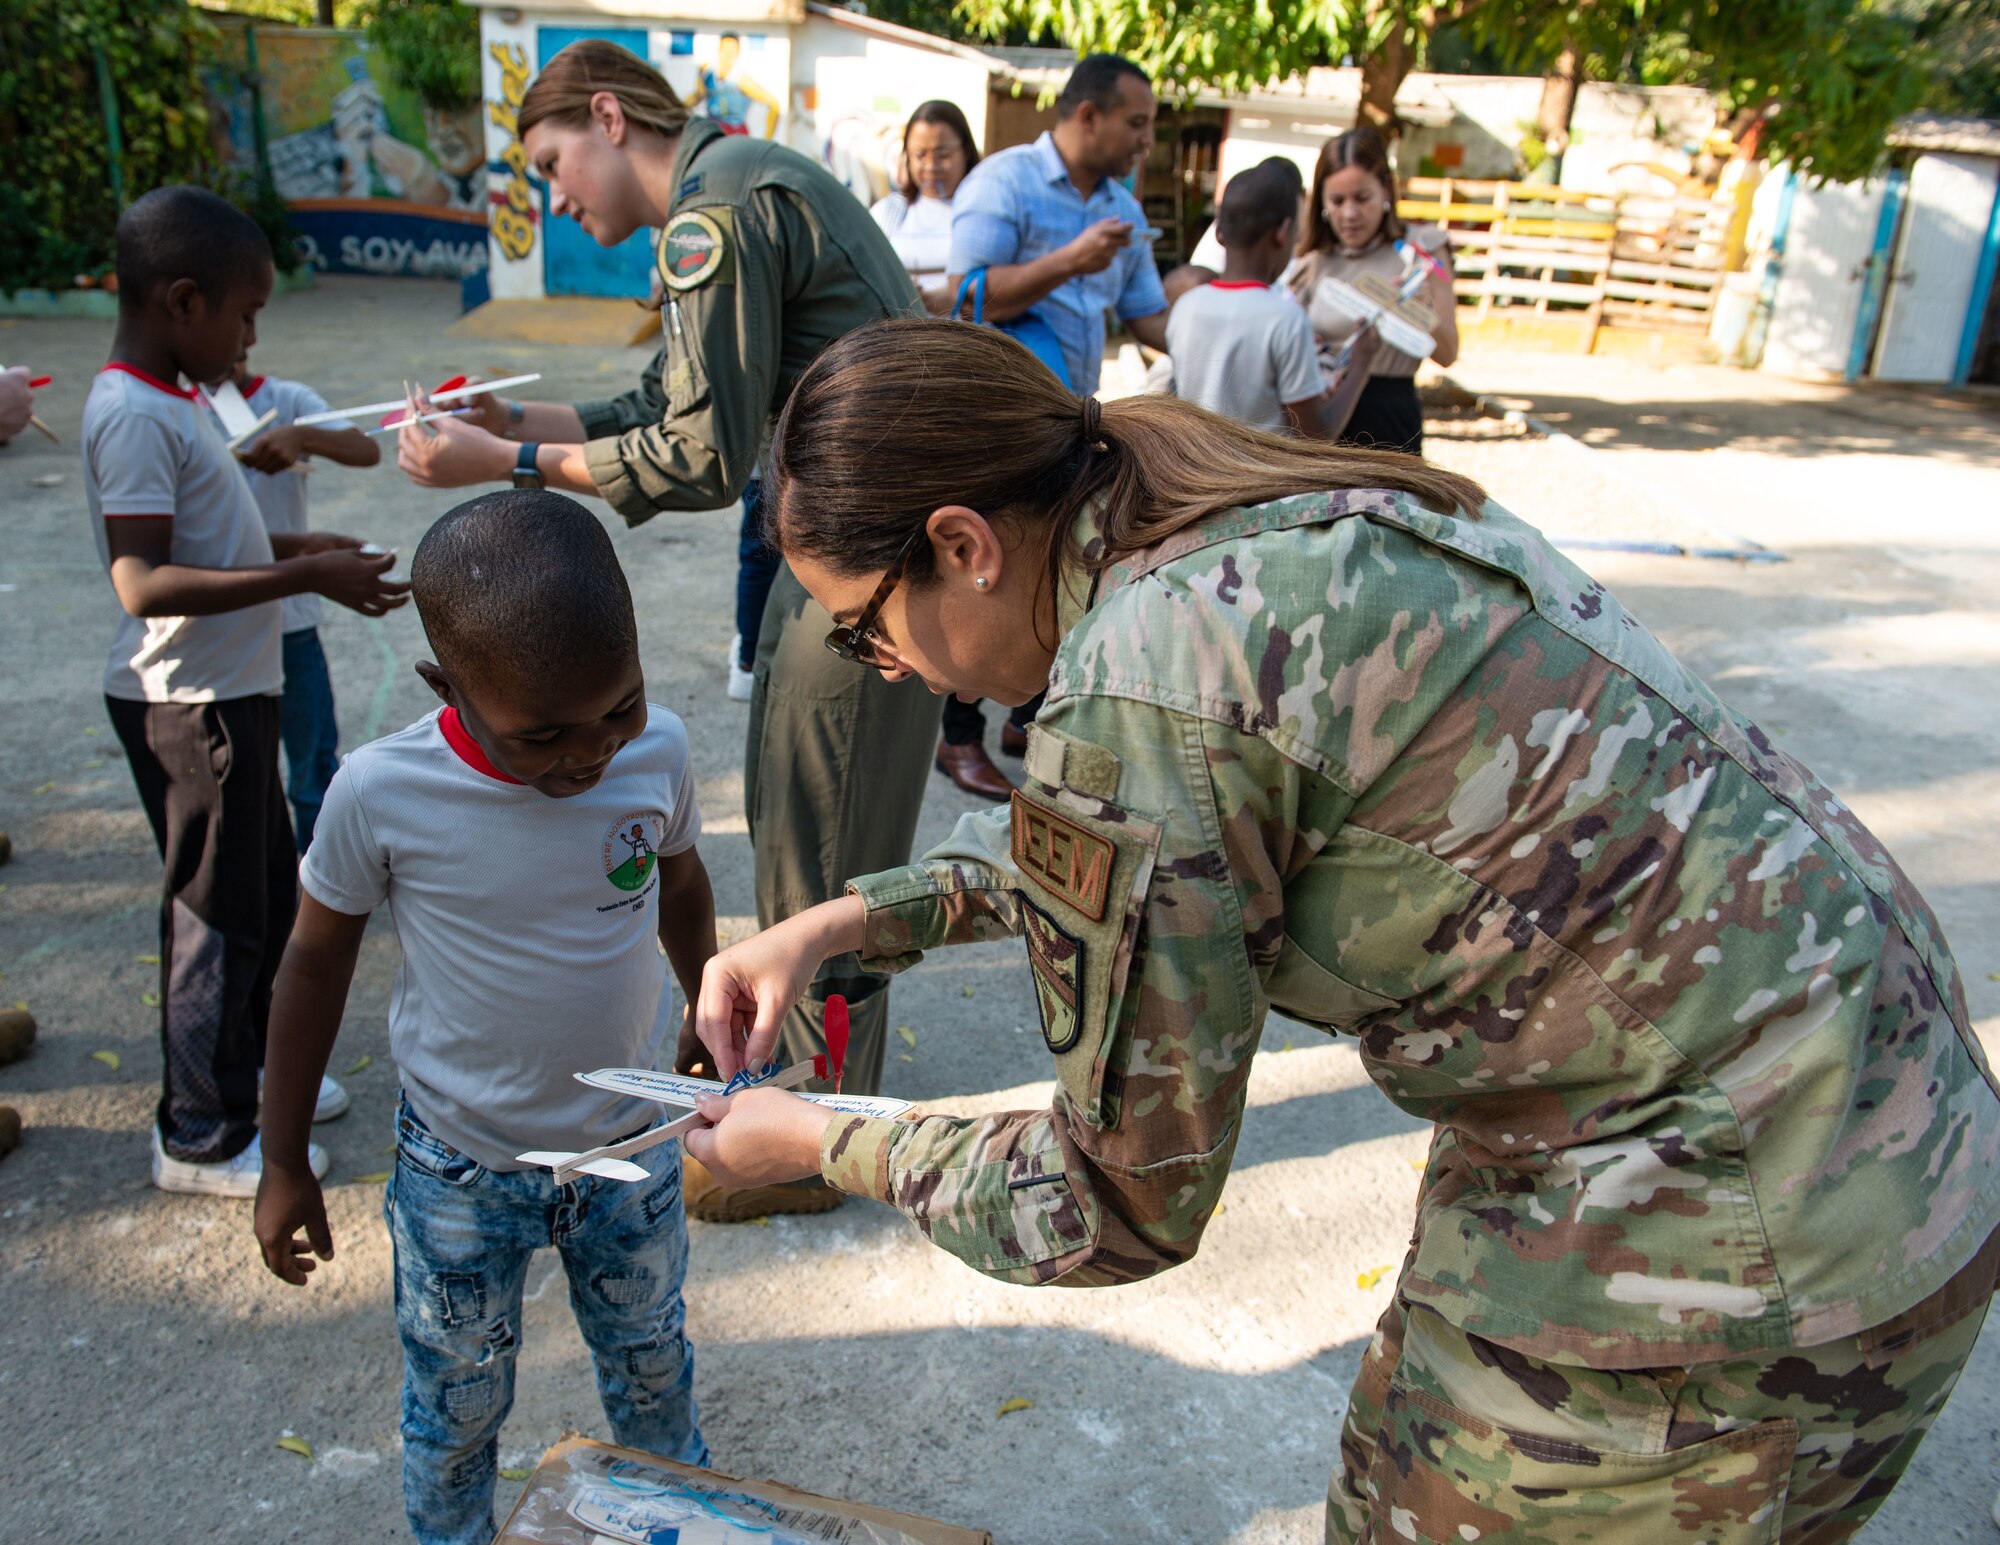 Senior Master Sgt. Keyla Watt, 12th Air Force International Enlisted Affairs Manager, helps a young boy build his toy airplane at Fundación Ened Boca Chica, Dominican Republic, Feb. 21, 2023. The foundation is an orphanage that hosts 28 boys between 5-16 years old who are from both Dominican and Haitian descent. Members from the U.S. Air Force and Fuerza Aérea de Republica Dominicana visited the orphanage to talk about their profession and the importance of education and resilience. (U.S. Air Force photo by Tech. Sgt. Jessica H. Smith-McMahan)